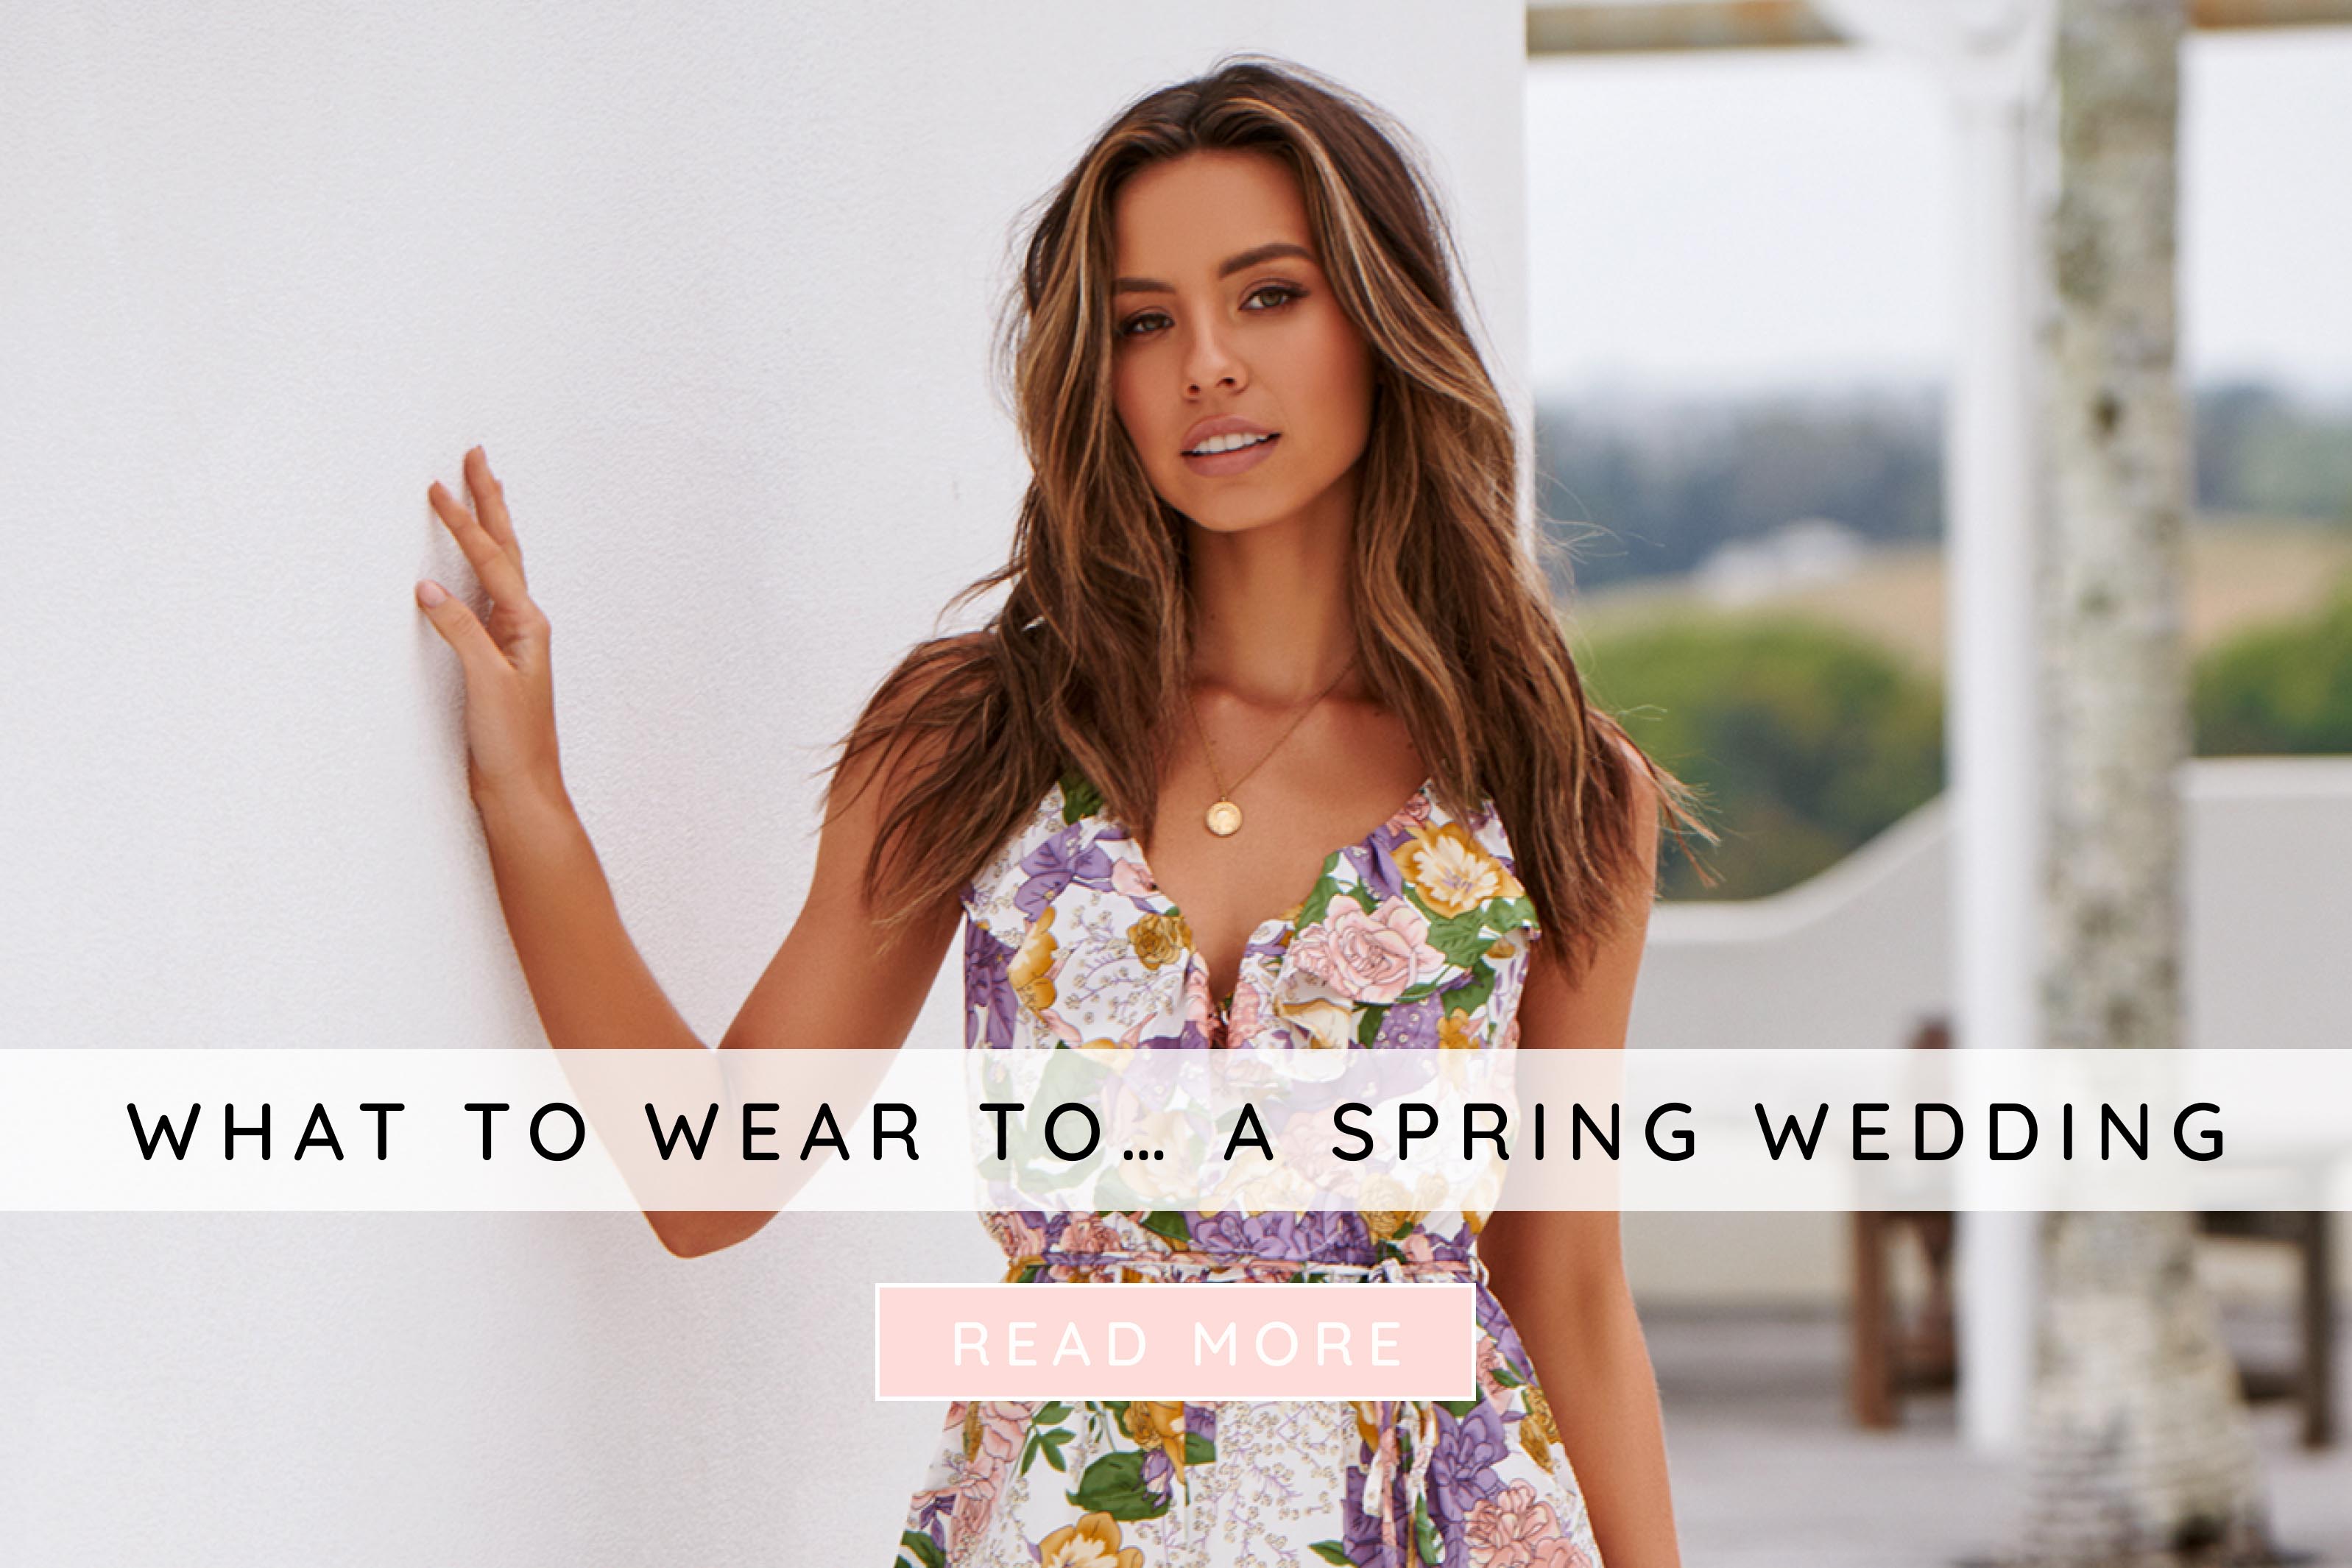 What to wear to… a spring wedding